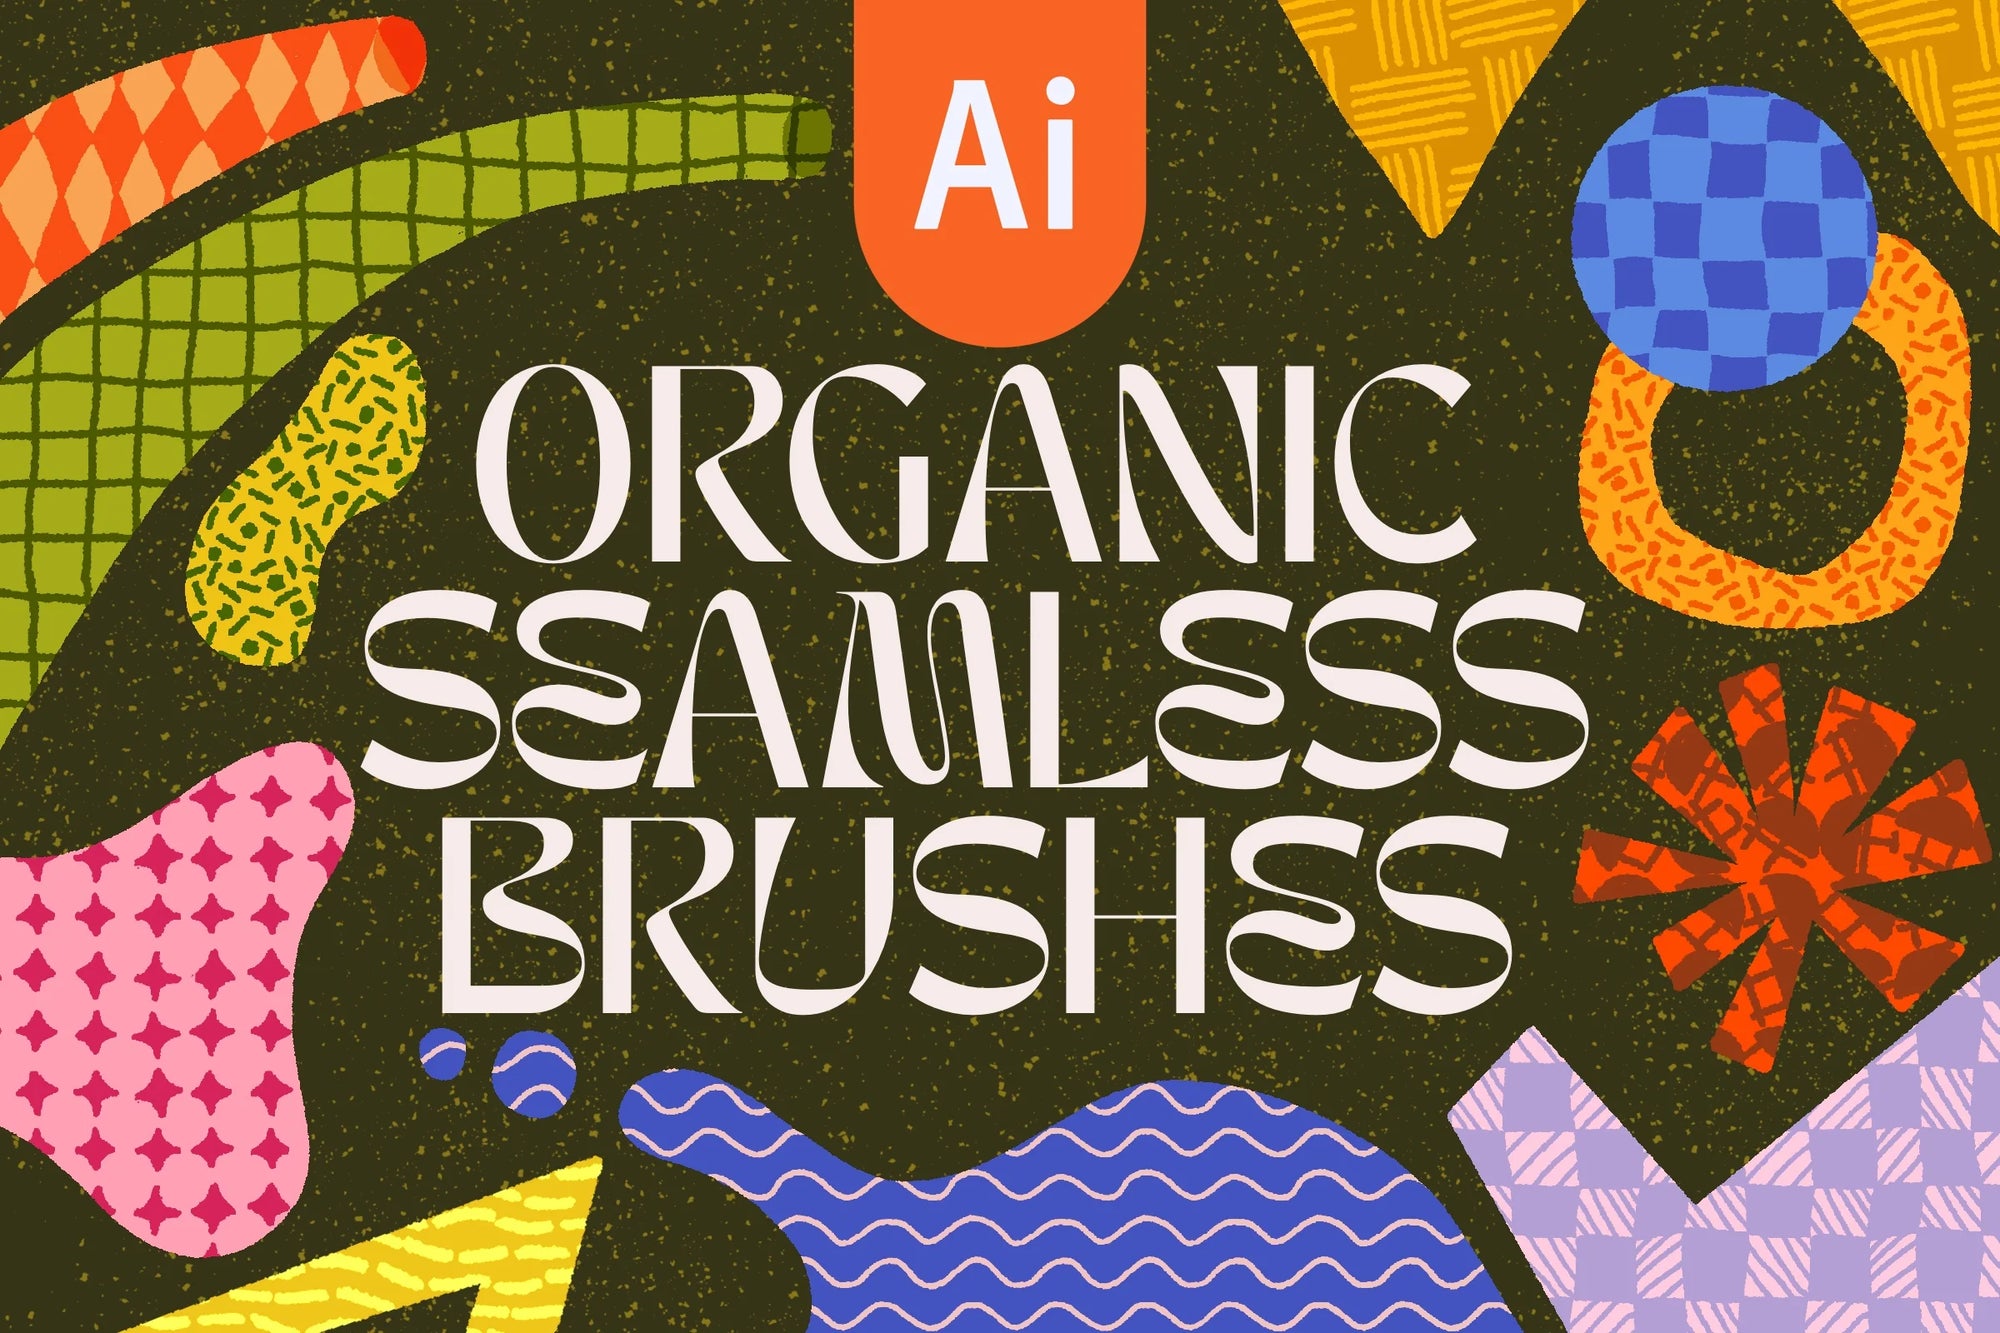 Colorful digital graphic promoting "Adobe Illustrator Organic Seamless Brushes 20-Pack" for Illustrator, featuring assorted patterns and shapes in vibrant colors by Esther Nariyoshi Studio.